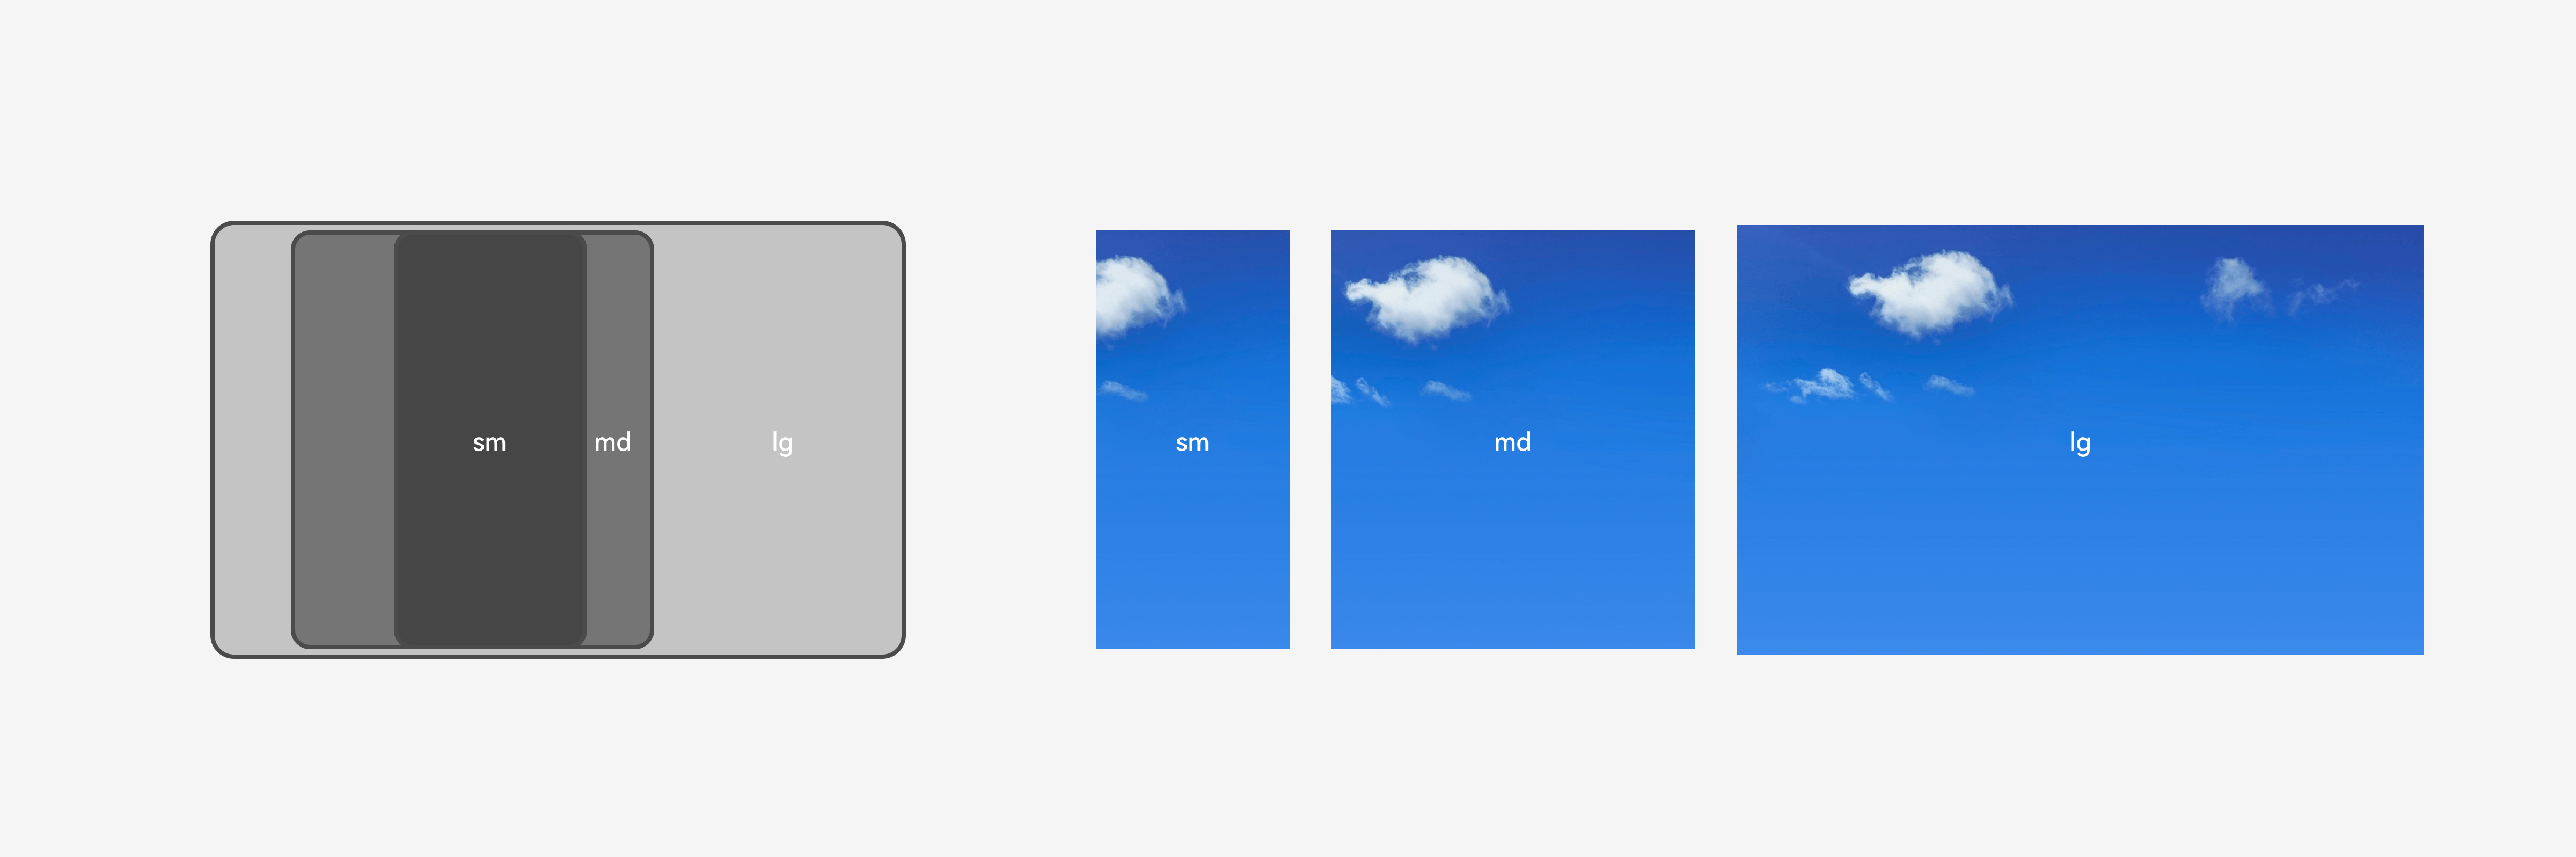 4.8-multiple-images-about-a-sunny-day-for-different-devices